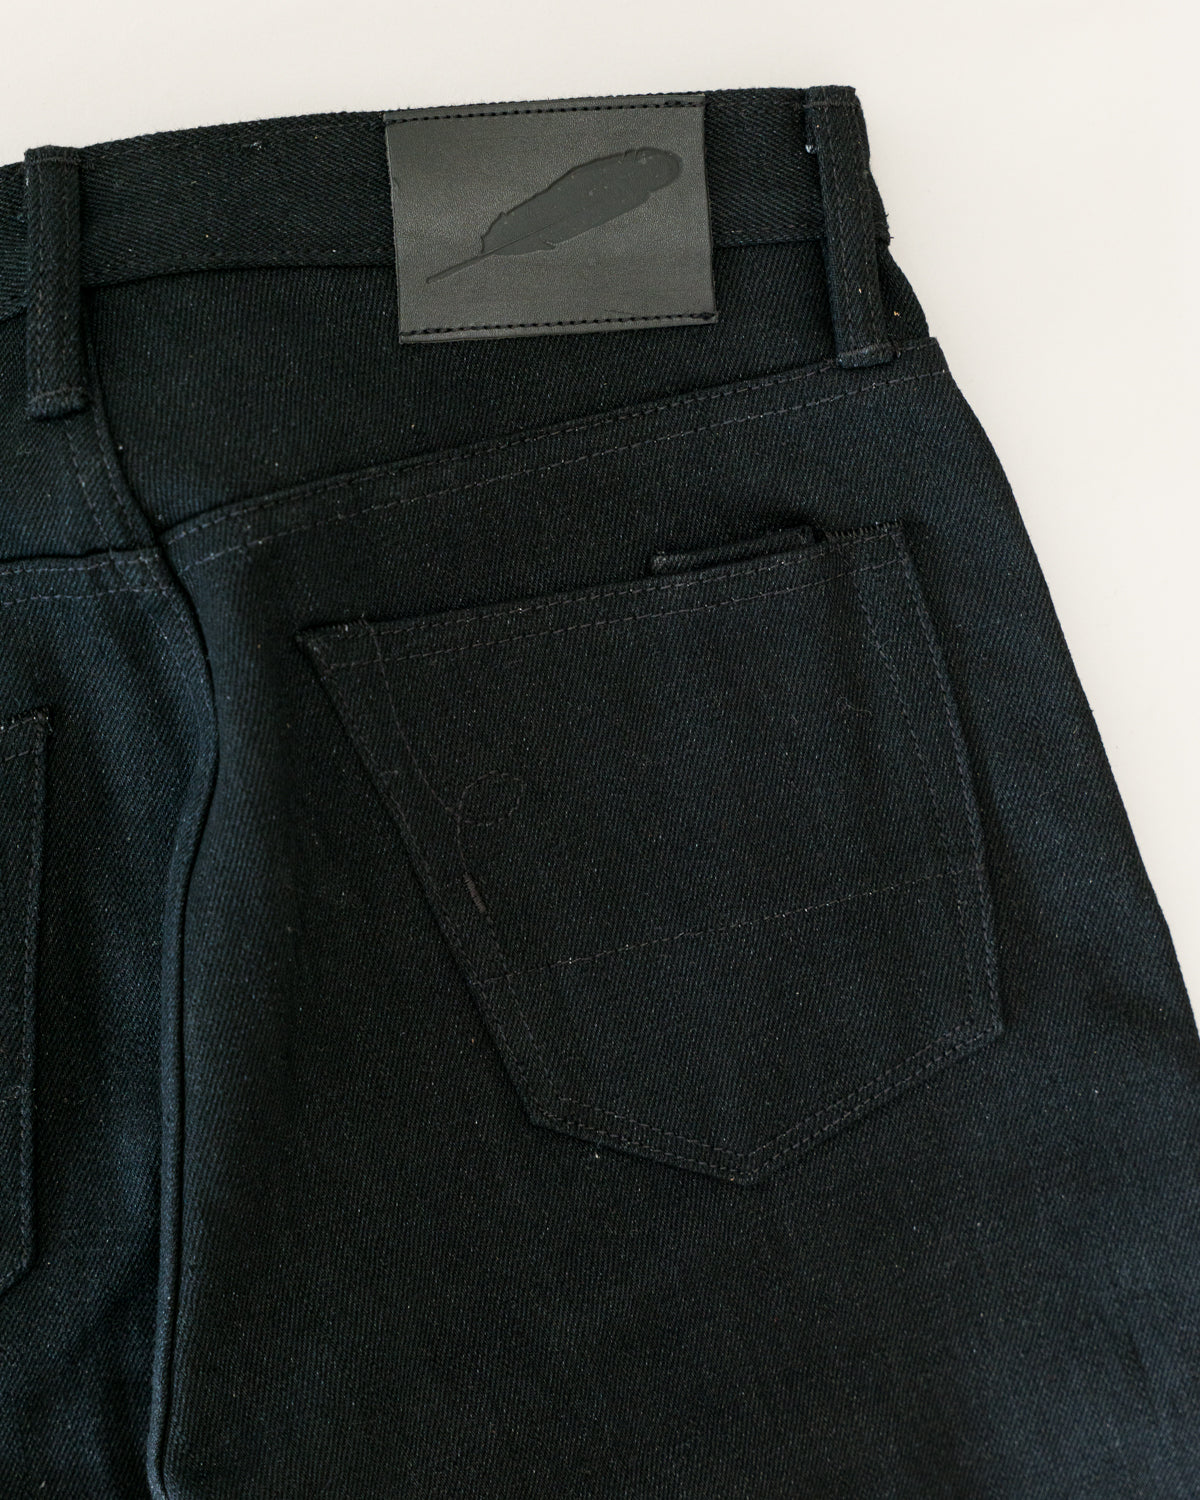 17oz - Cryptic Stealth Selvedge - SK Fit | James Dant